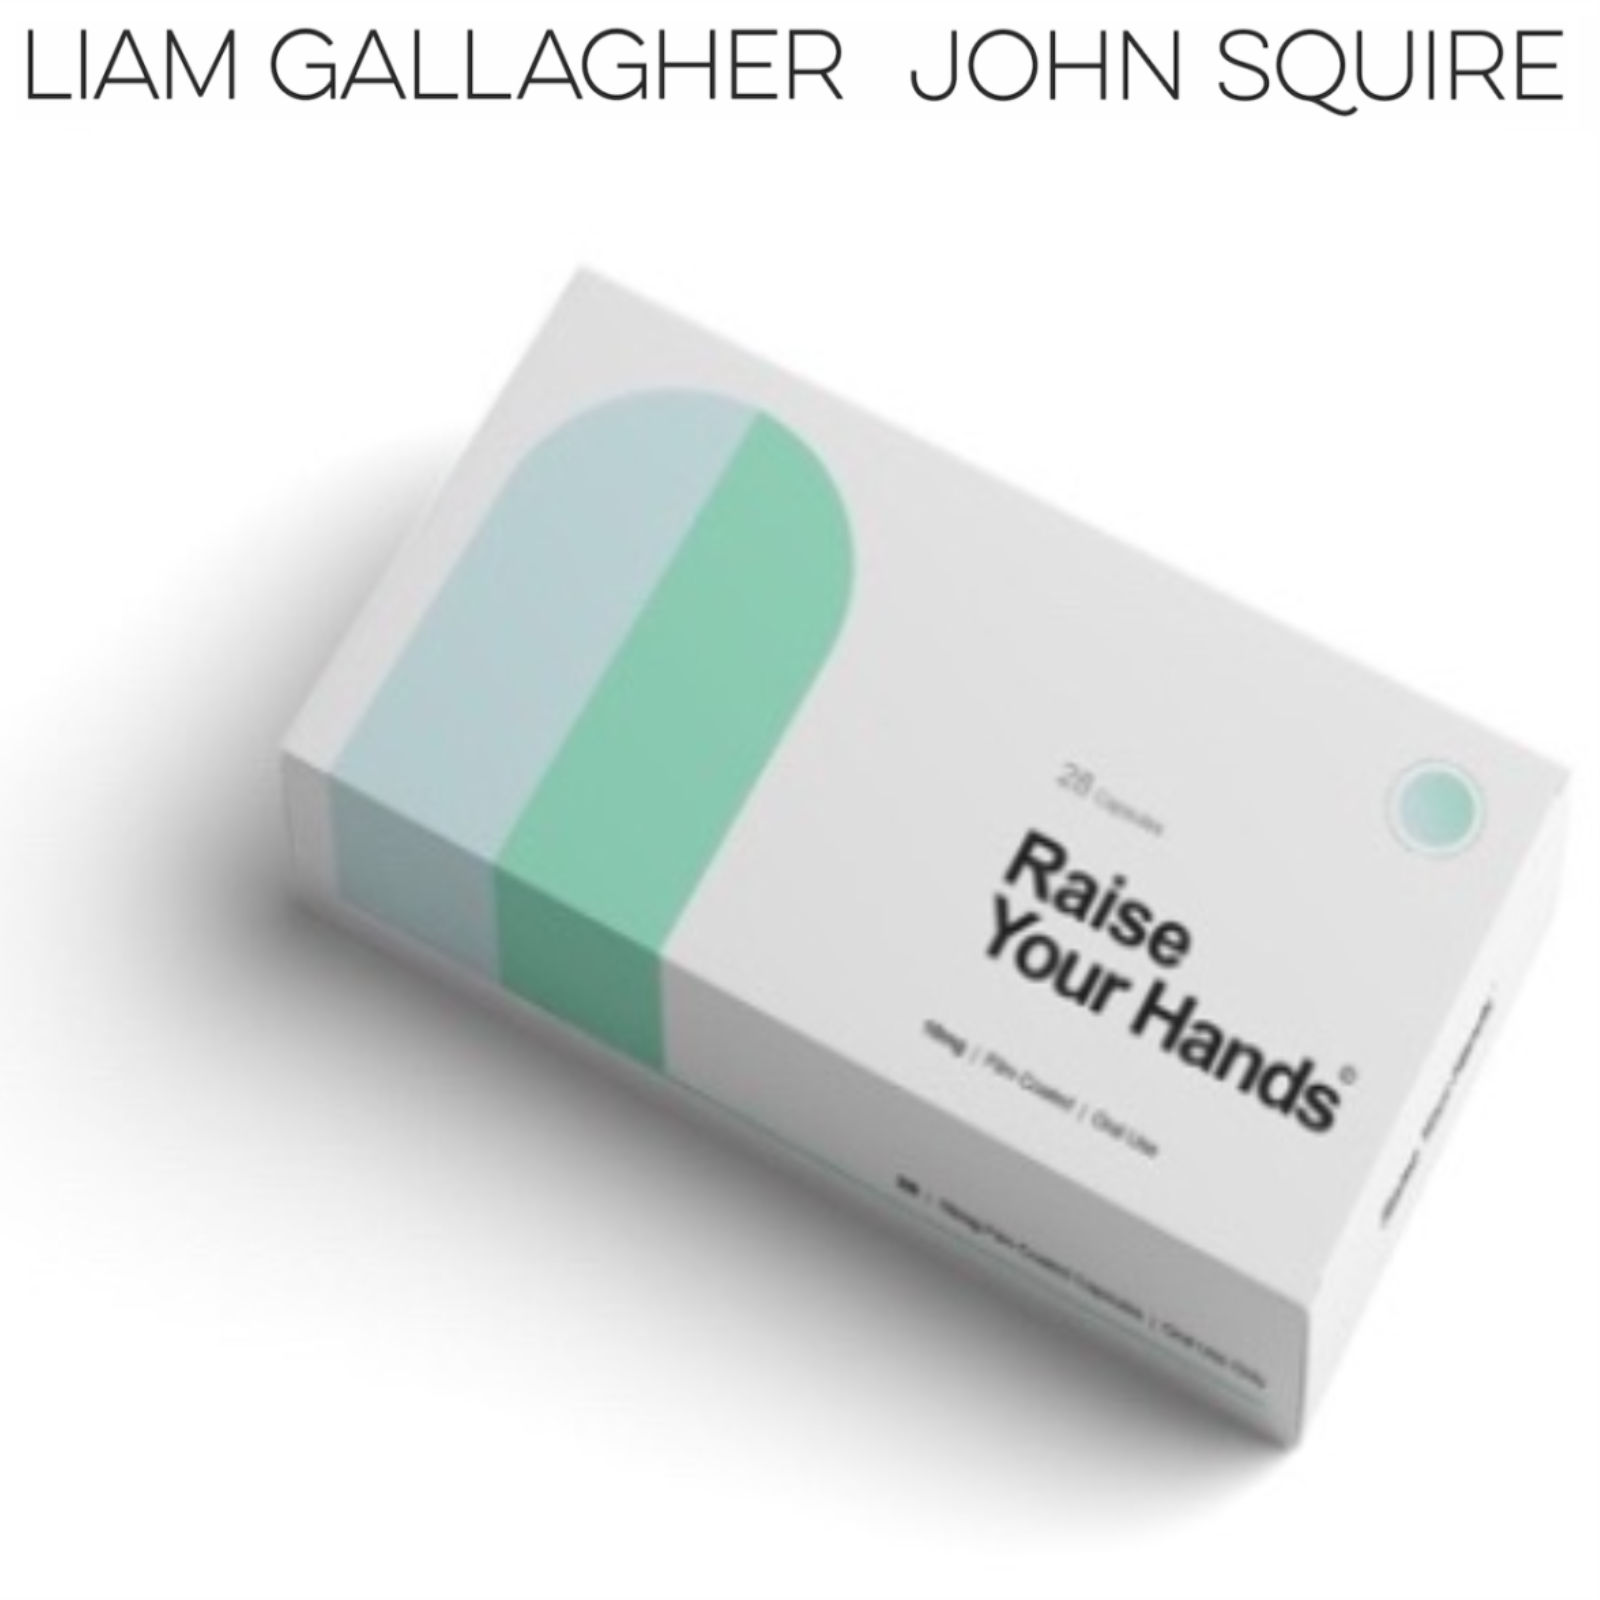 Liam Gallagher & John Squire — Raise Your Hands cover artwork